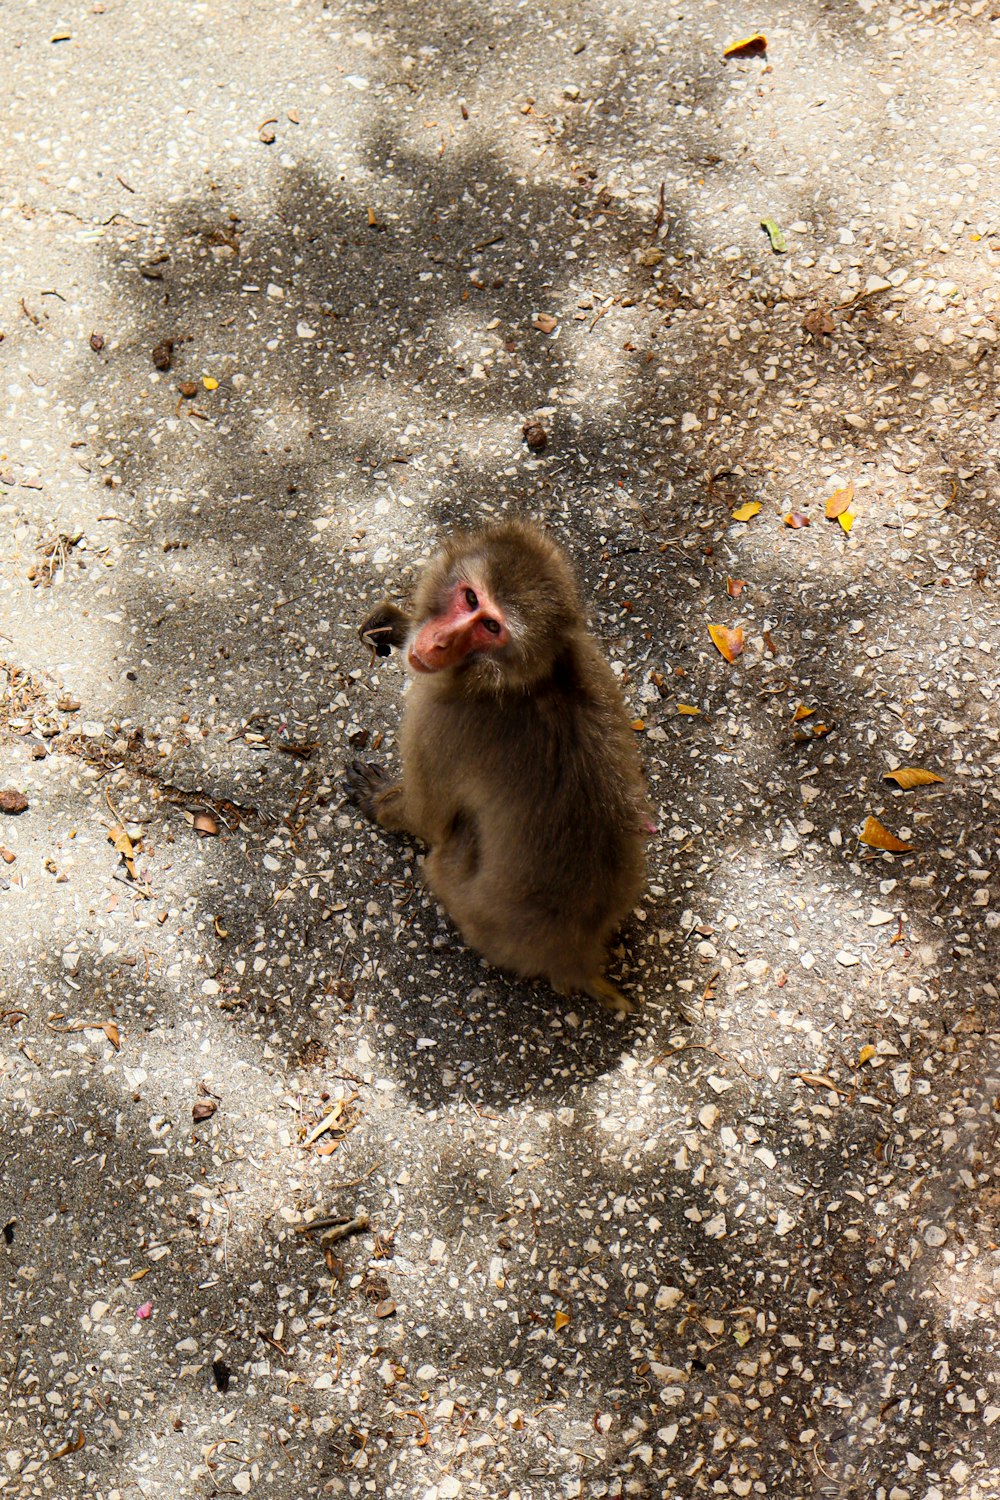 a baby monkey sitting on the ground looking up